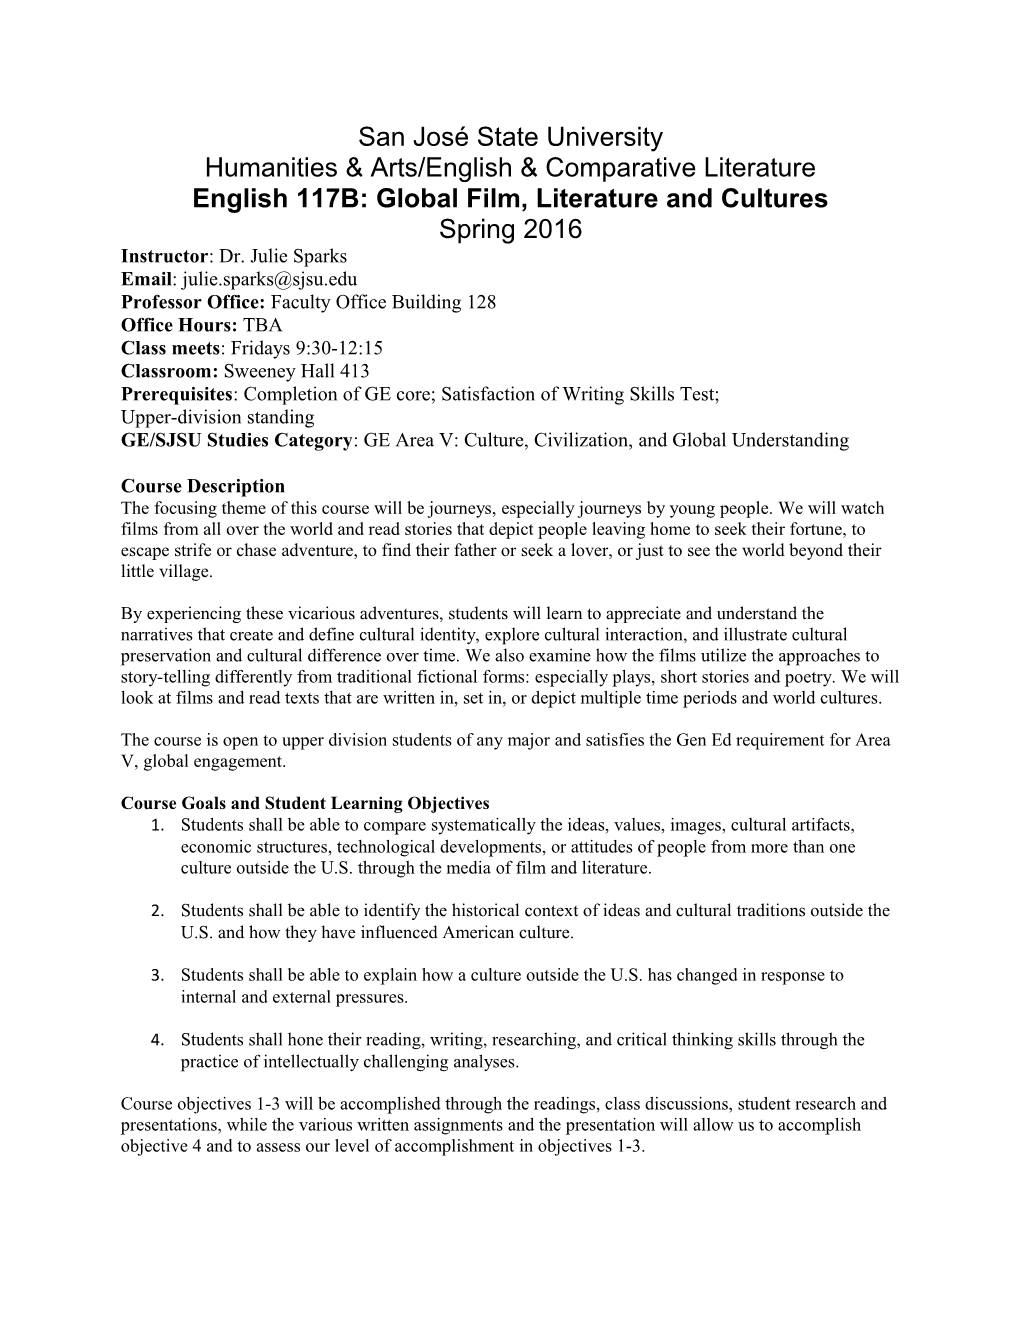 English 117B: Global Film, Literature and Cultures